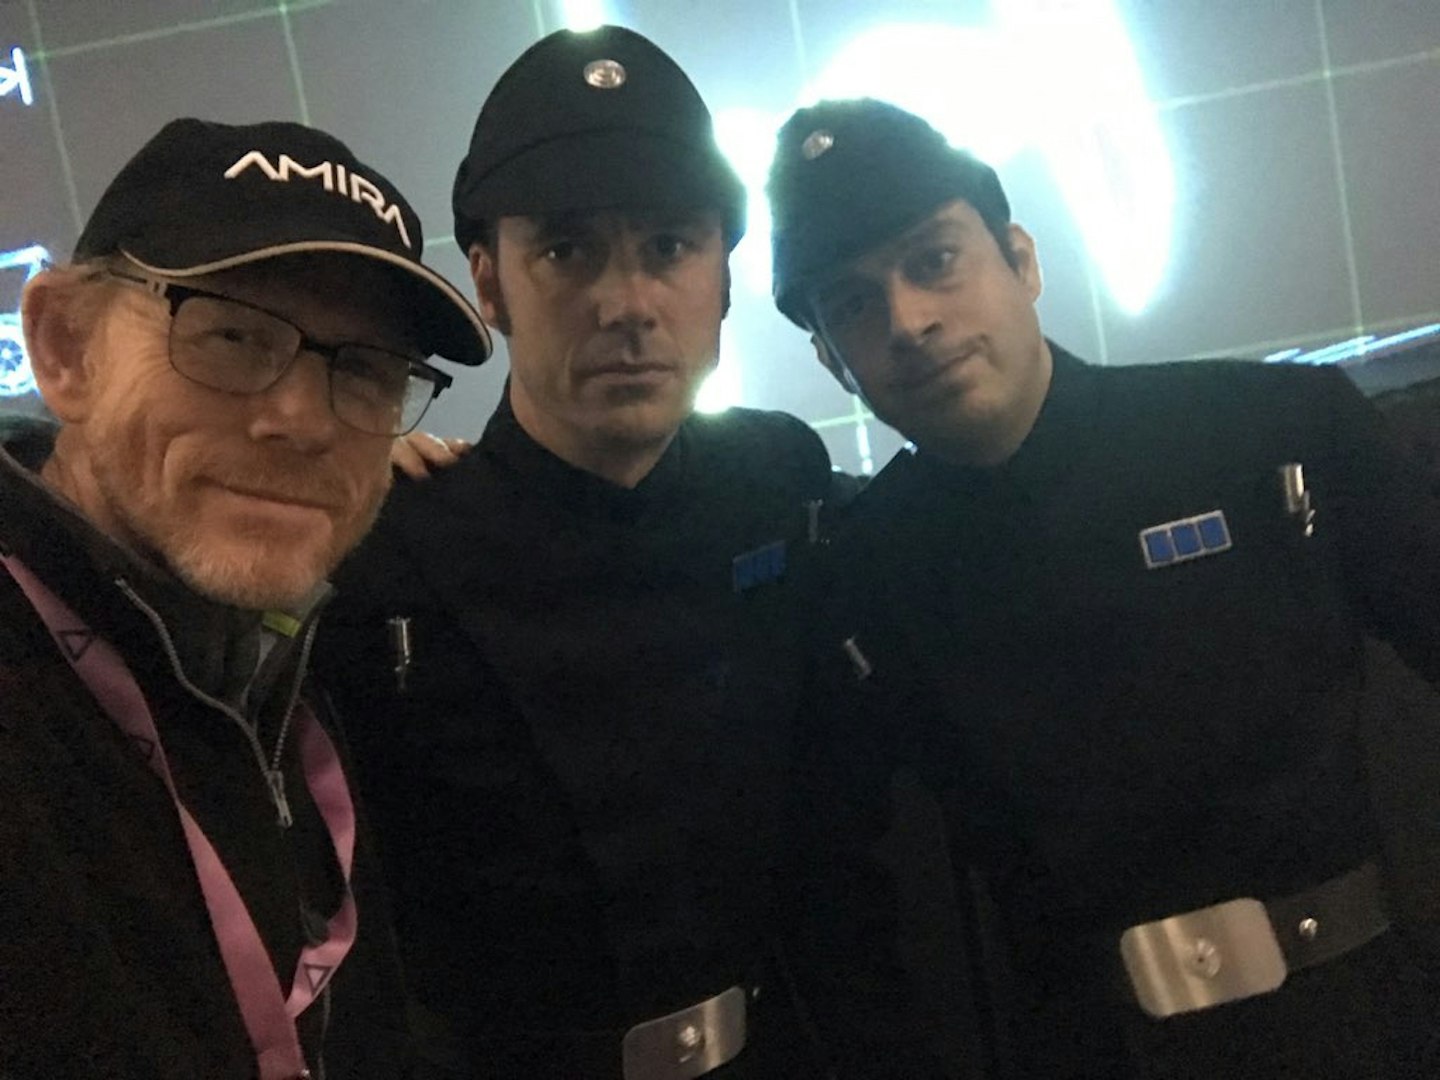 Ron Howard Tag and Bink Han Solo tease